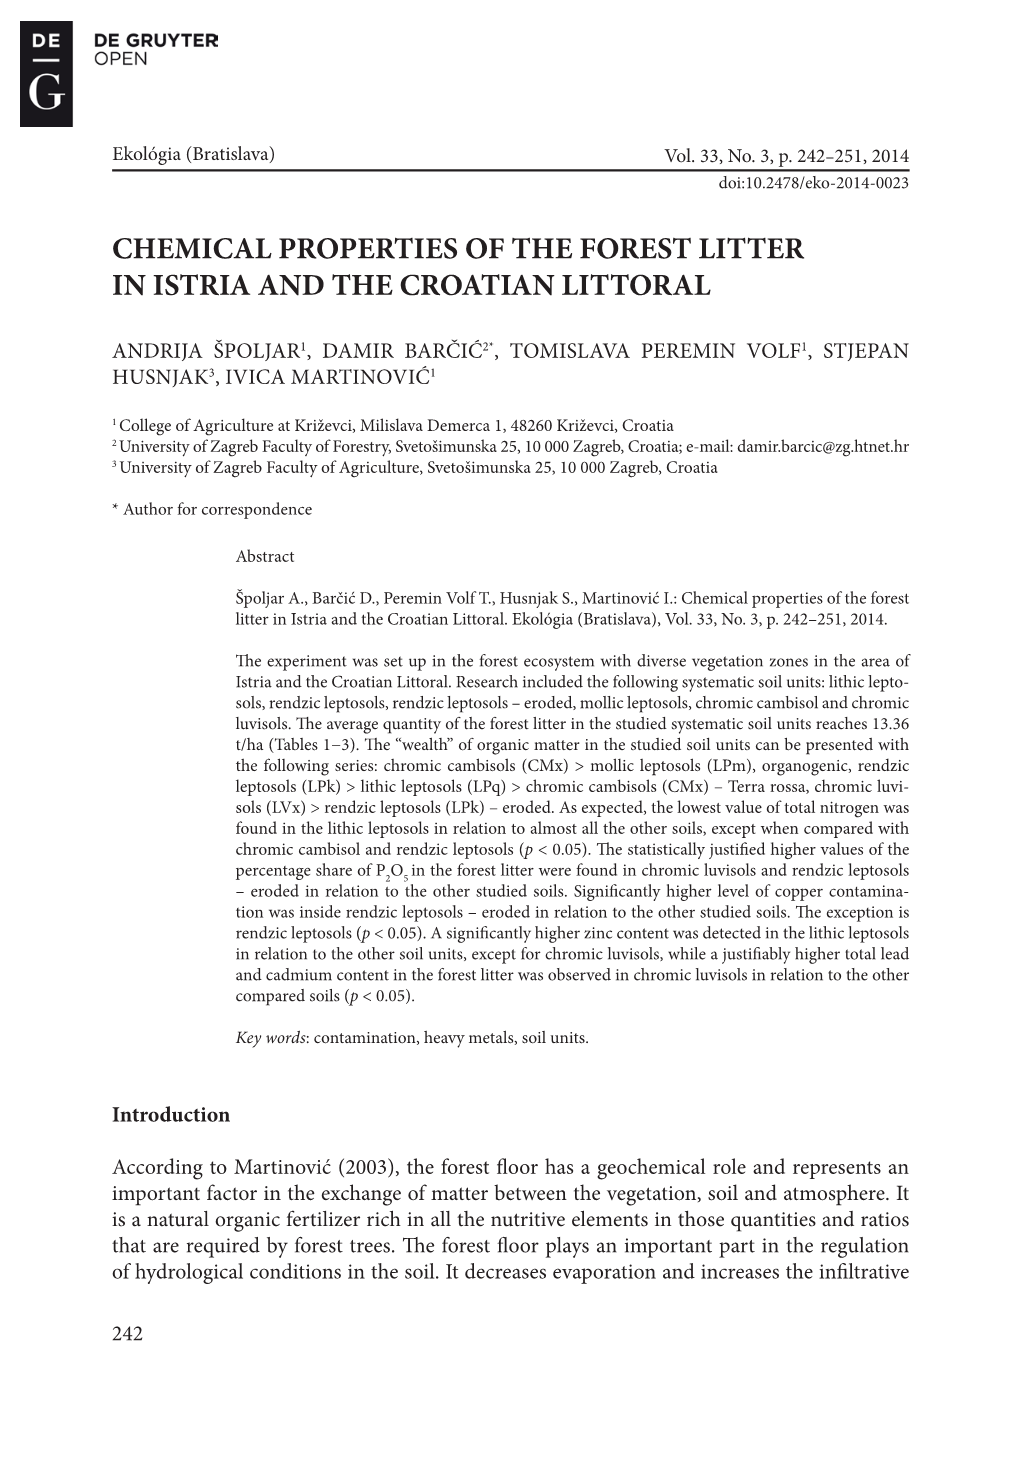 Chemical Properties of the Forest Litter in Istria and the Croatian Littoral